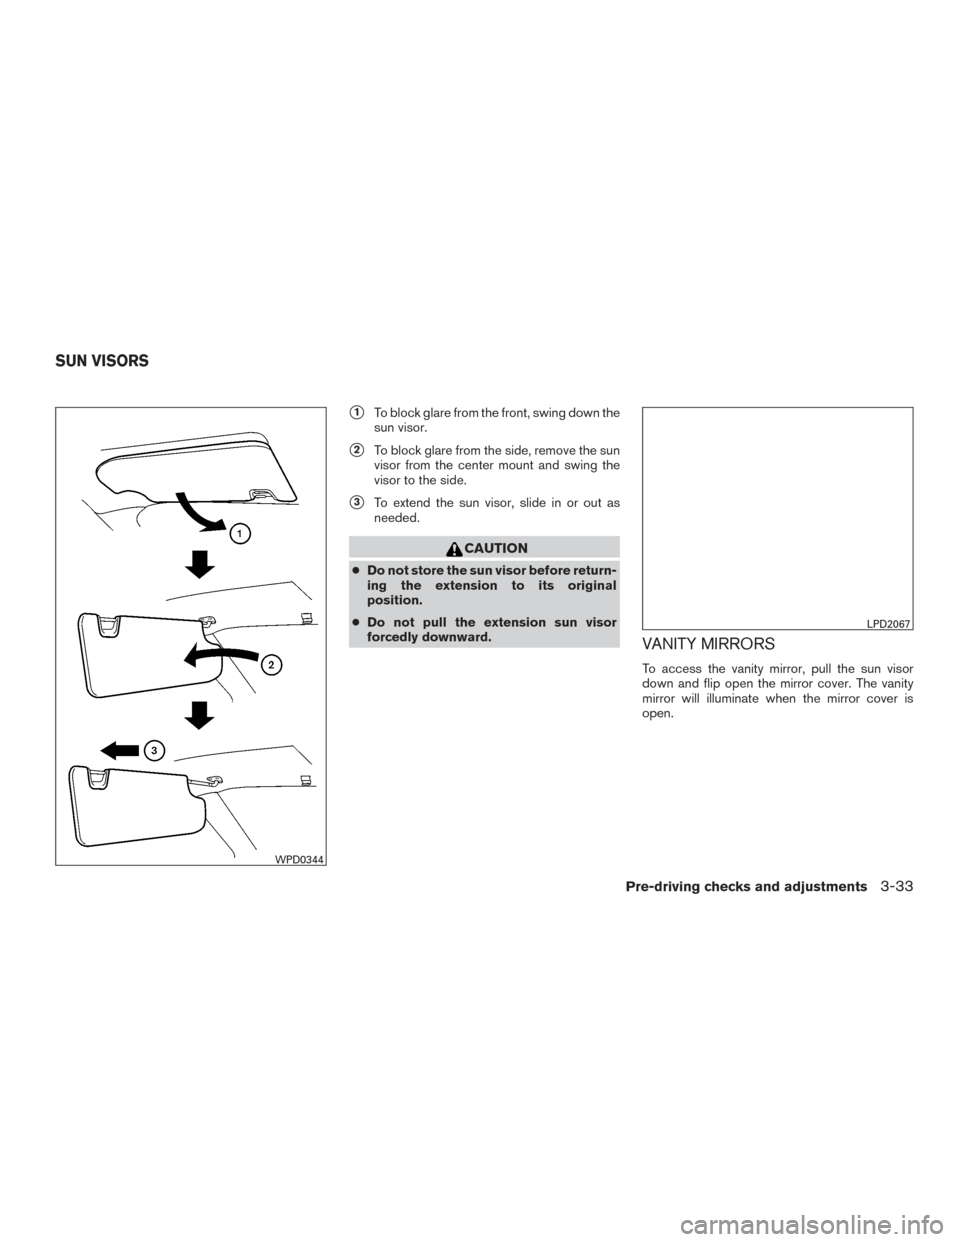 NISSAN ROGUE 2016 2.G Owners Manual 1To block glare from the front, swing down the
sun visor.
2To block glare from the side, remove the sun
visor from the center mount and swing the
visor to the side.
3To extend the sun visor, slide 